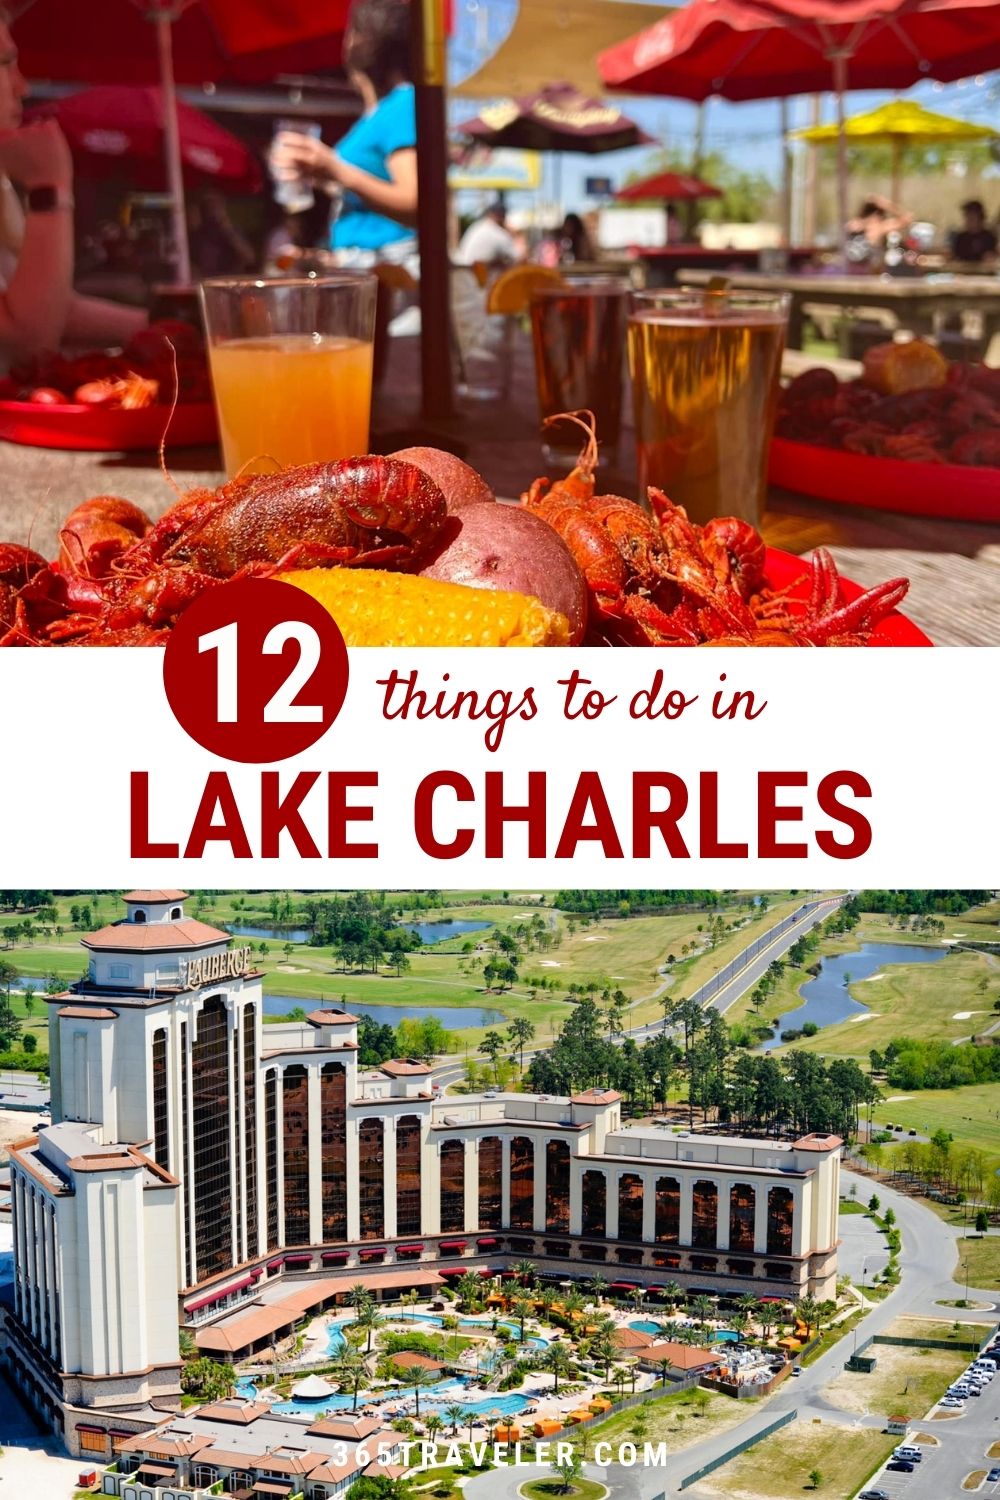 12 Outstanding Things To Do in Lake Charles, La